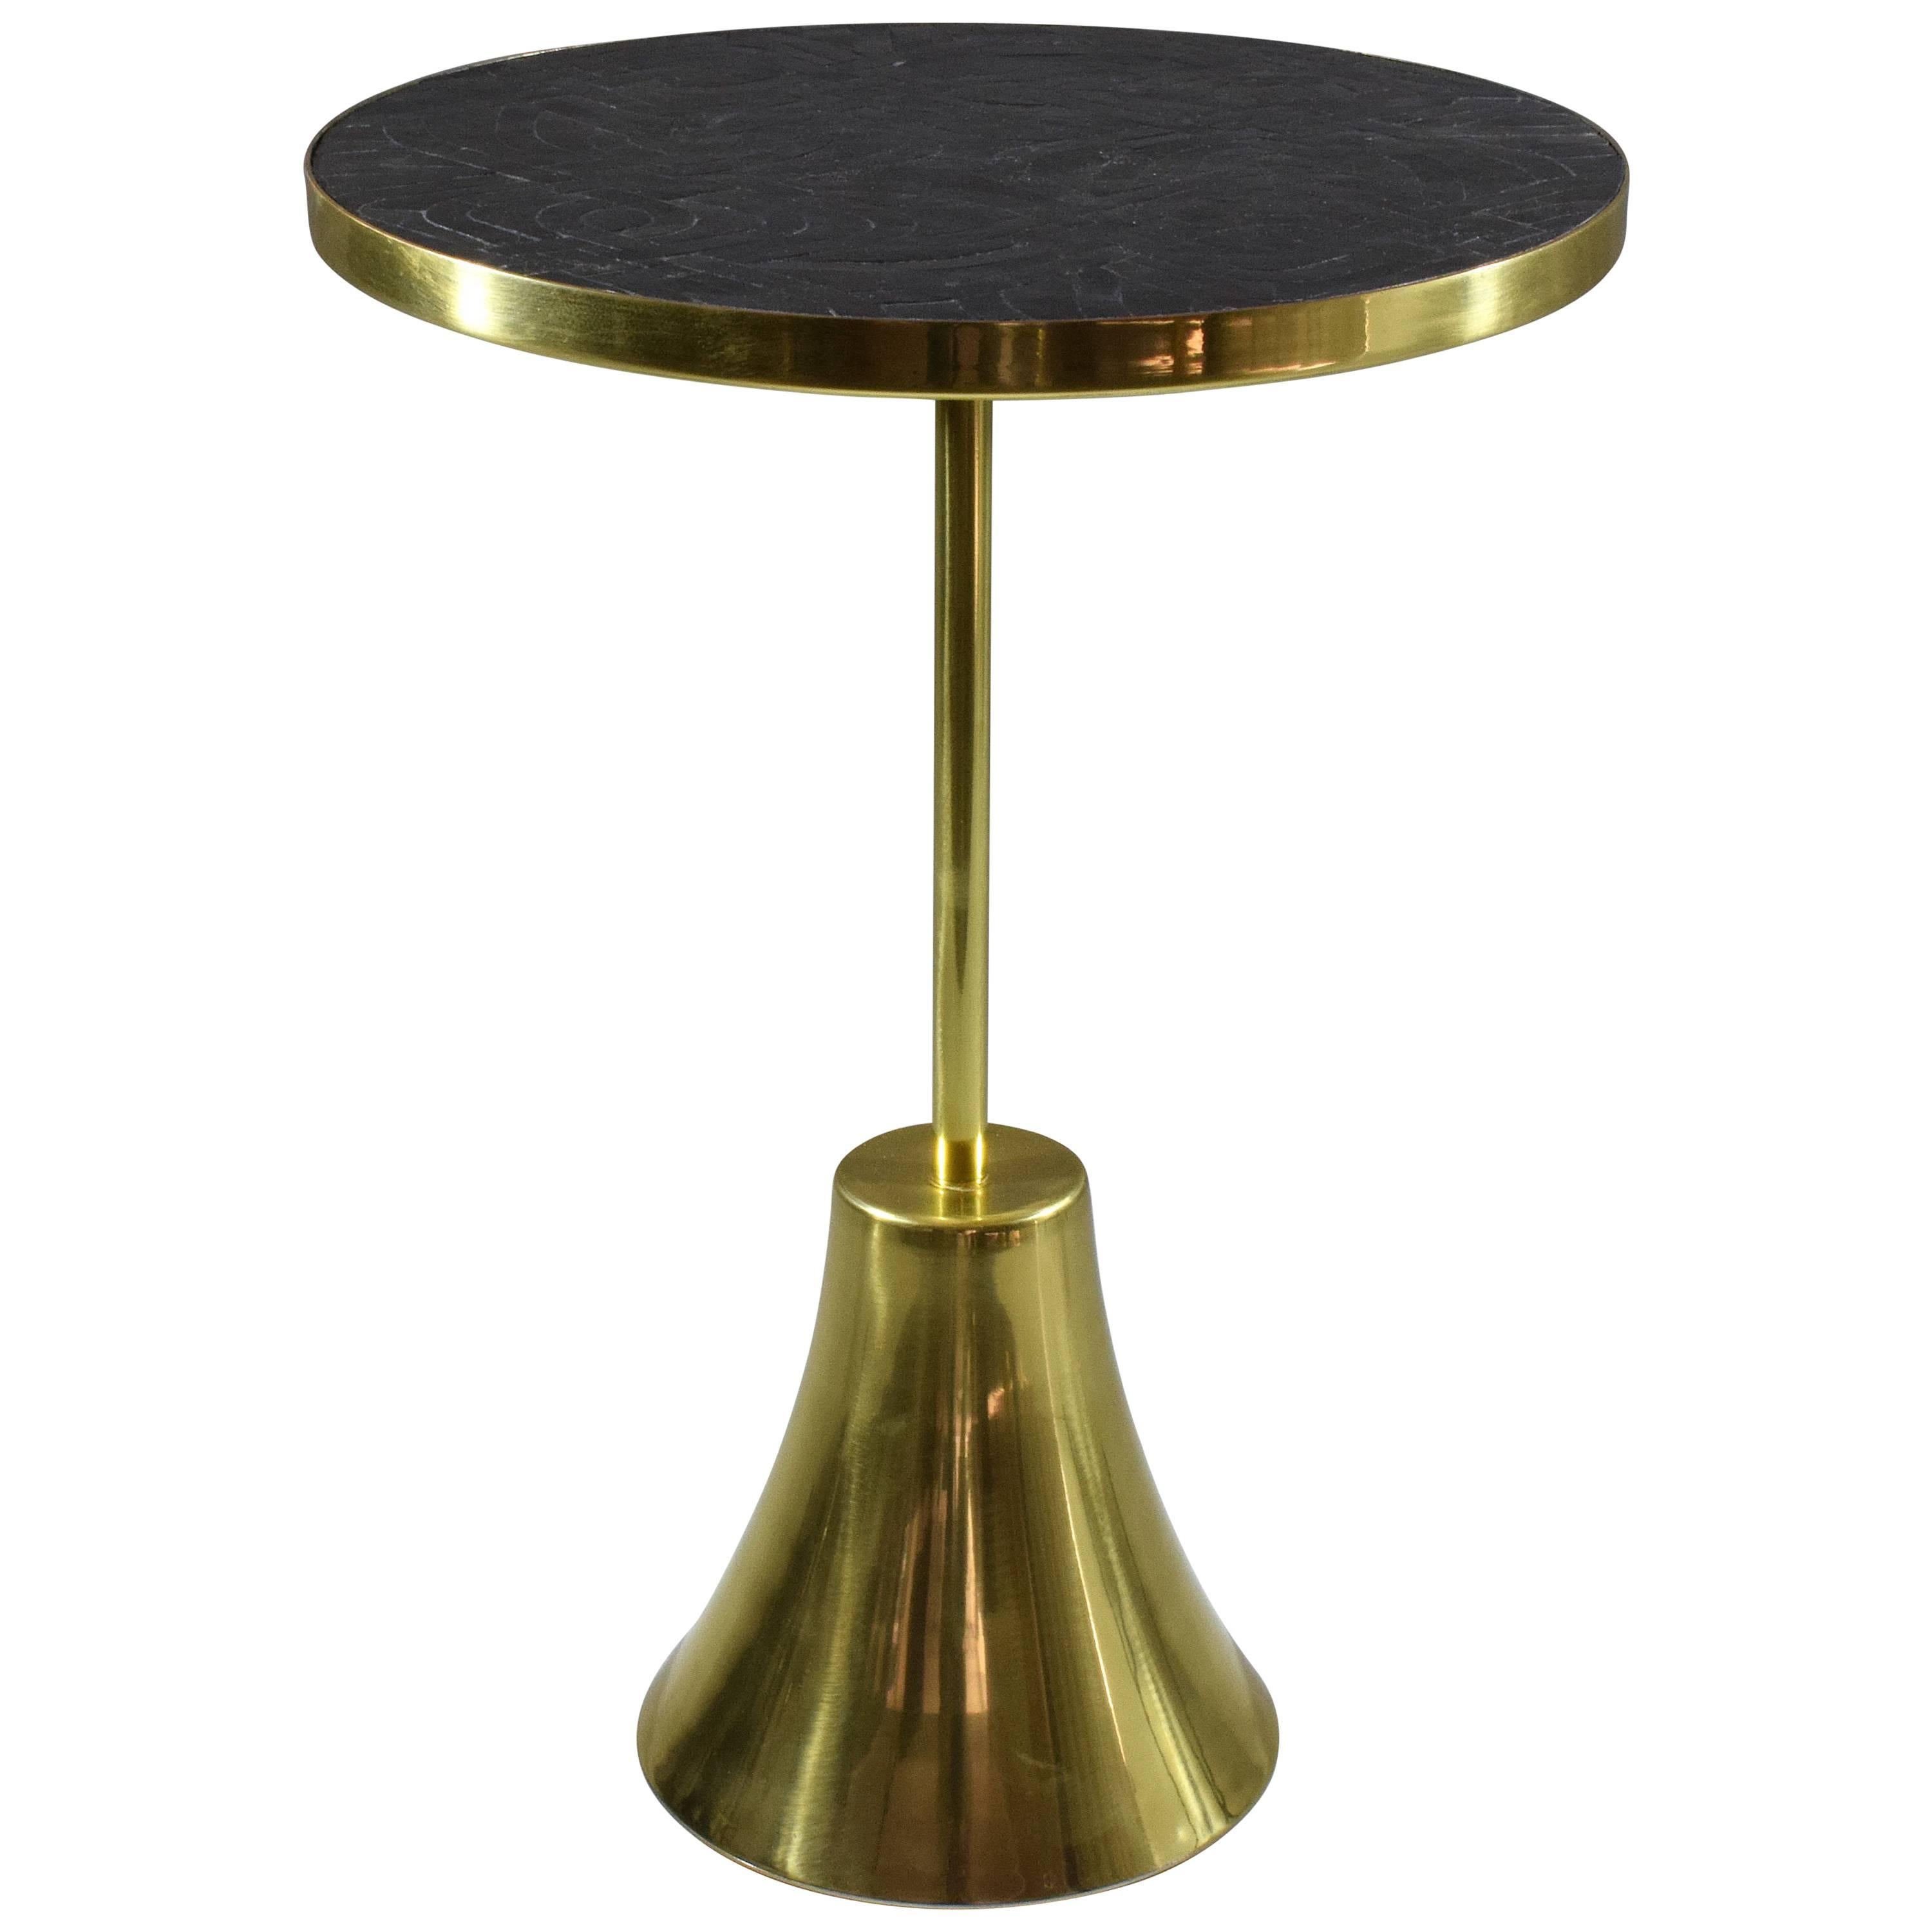 Zel-Ora Contemporary Brass Mosaic Side Table, Flow Collection